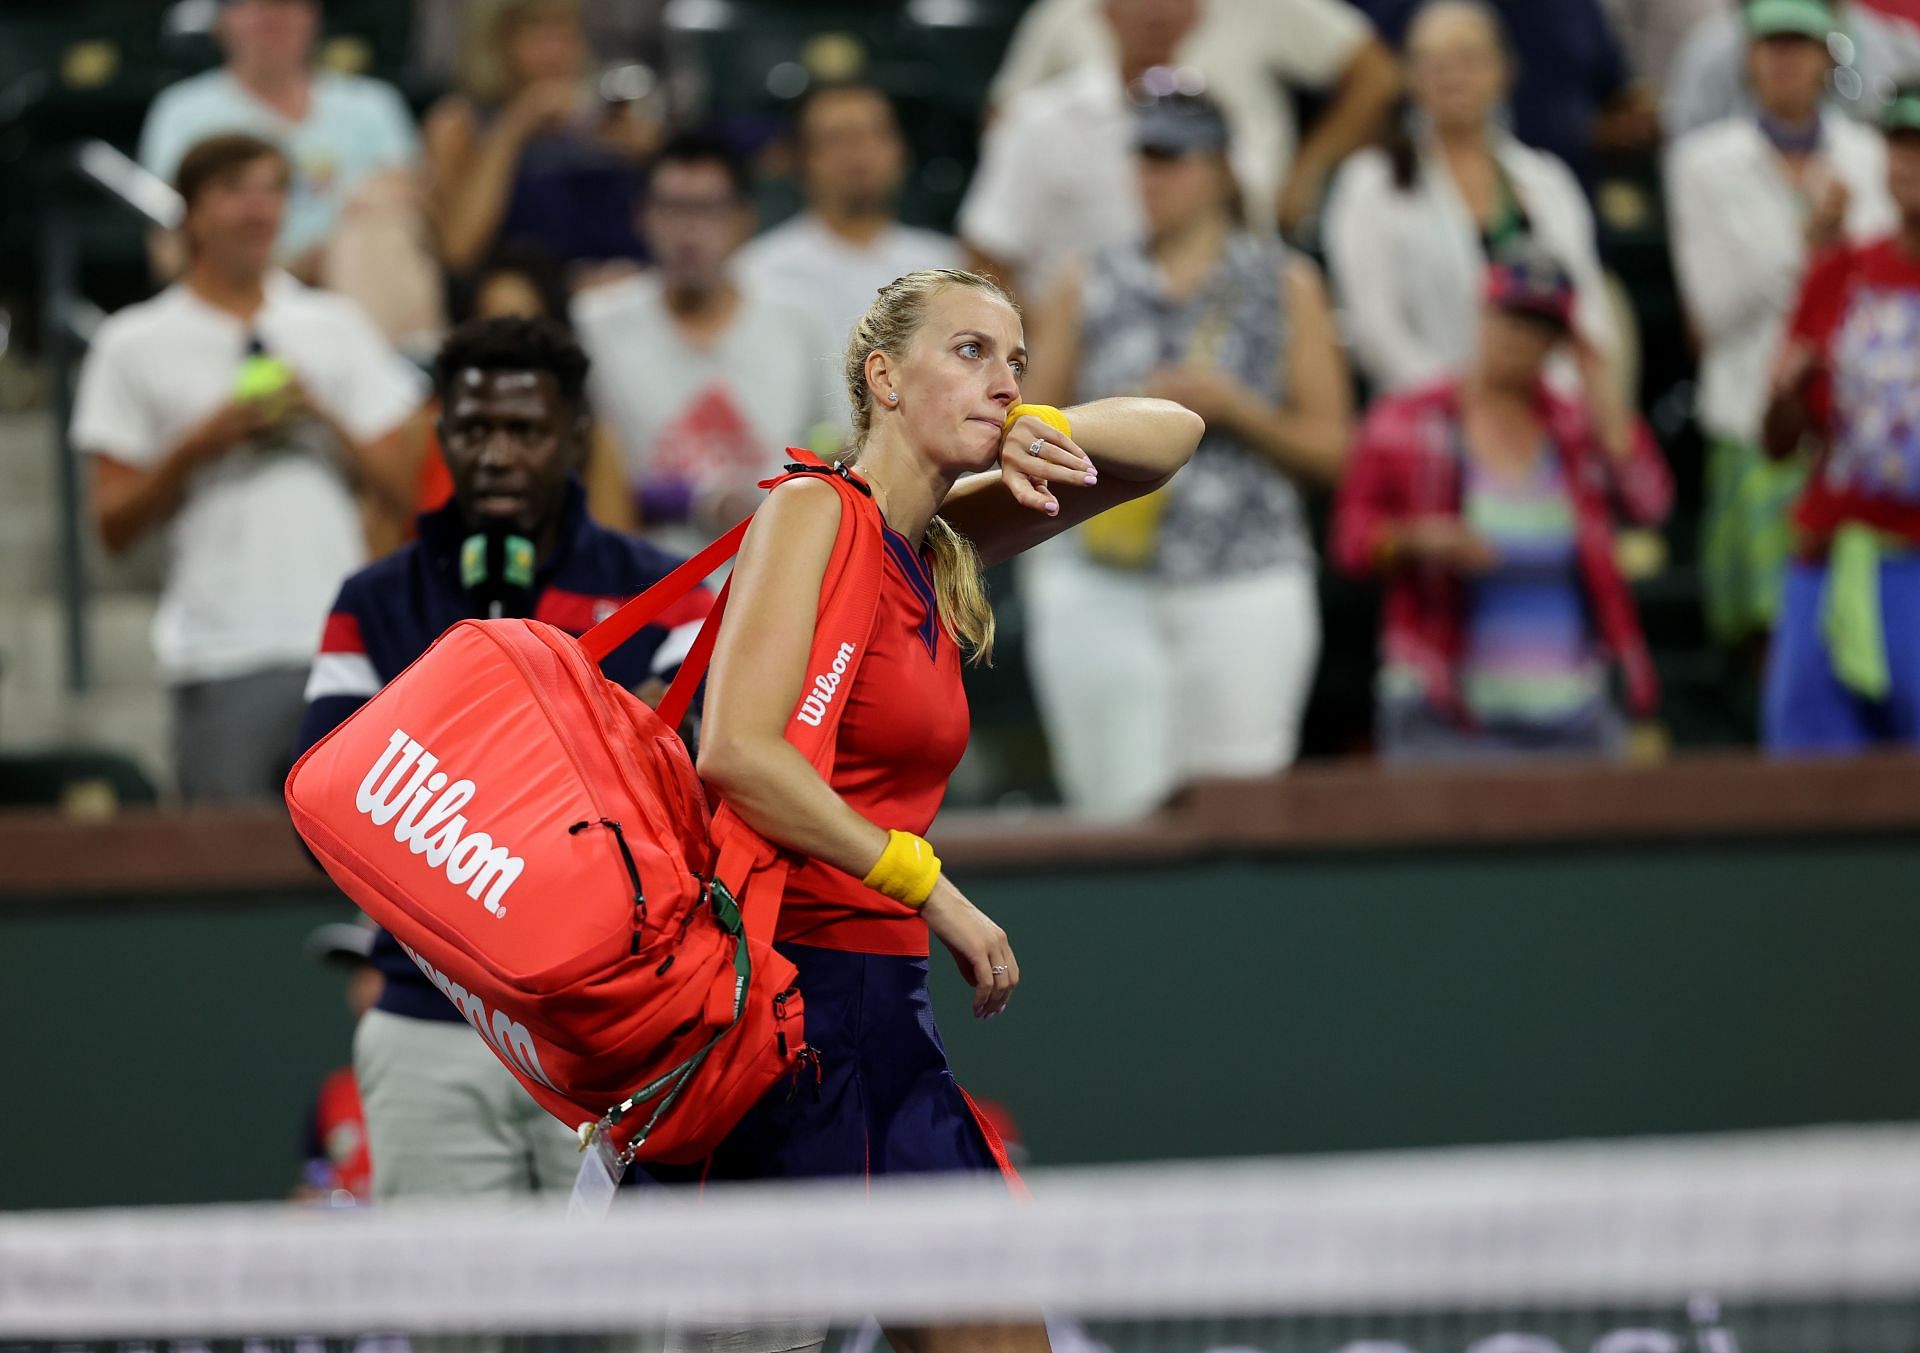 Petra Kvitova after bowing out of the 2021 BNP Paribas Open.